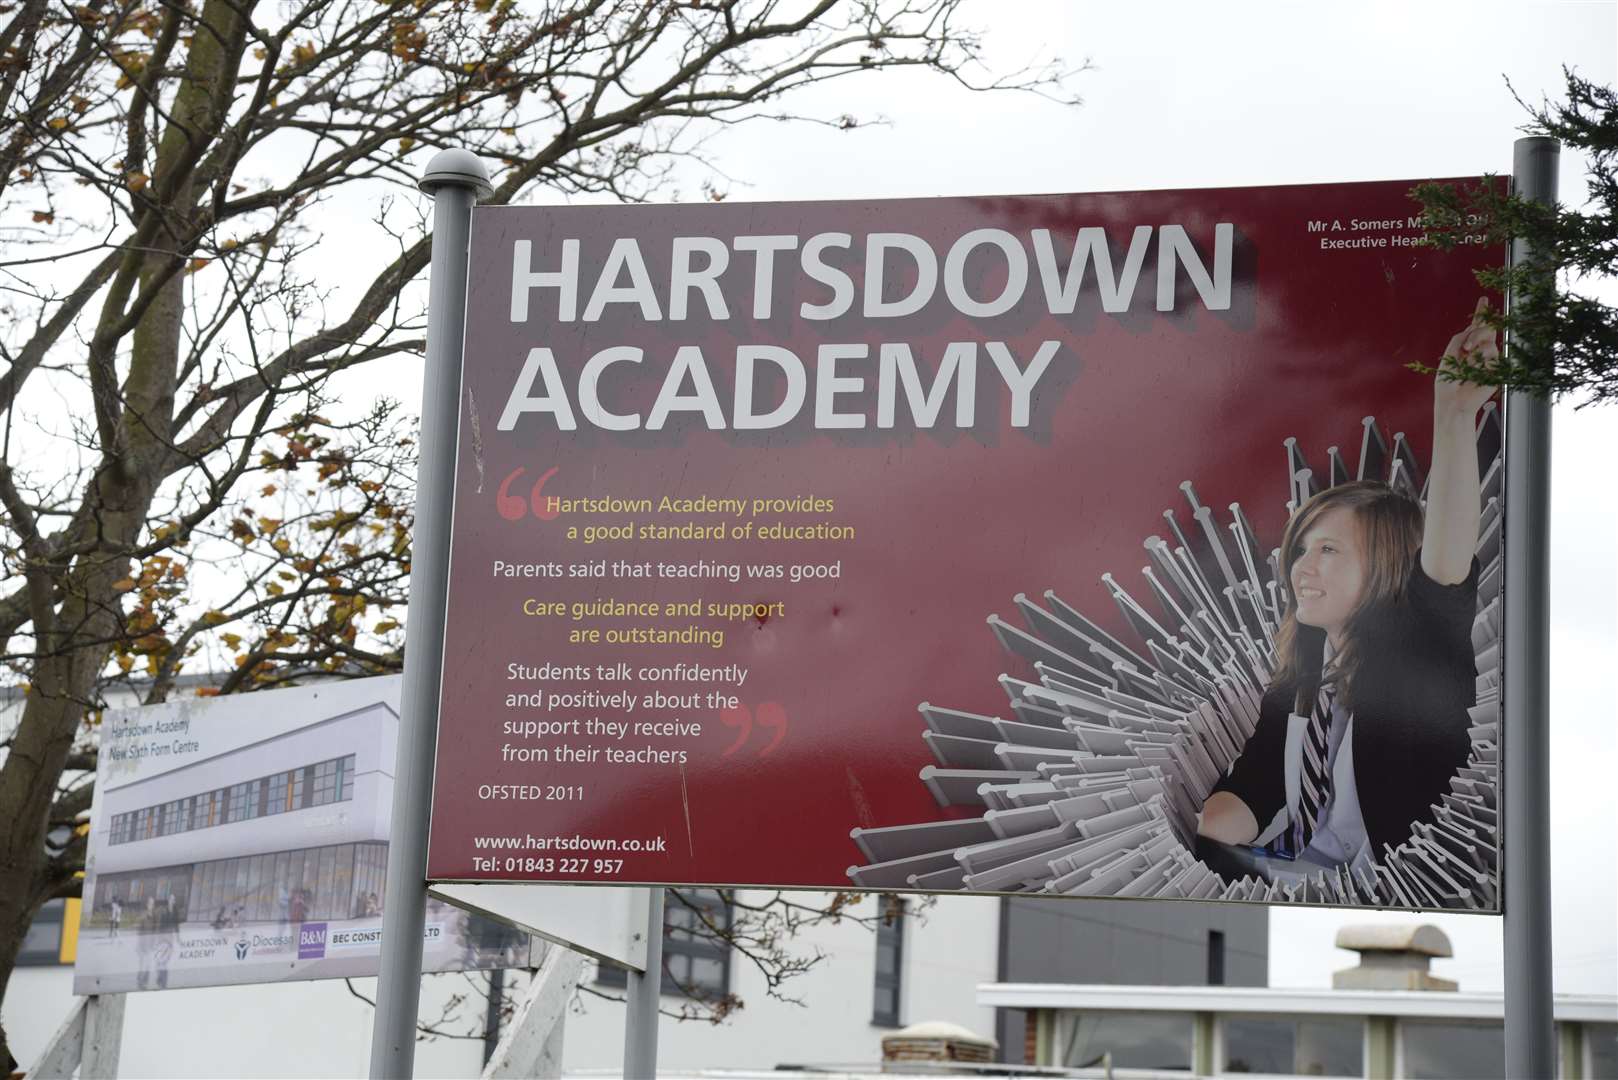 Mr Tate said he was proud of staff who 'care so much' at Hartsdown Academy